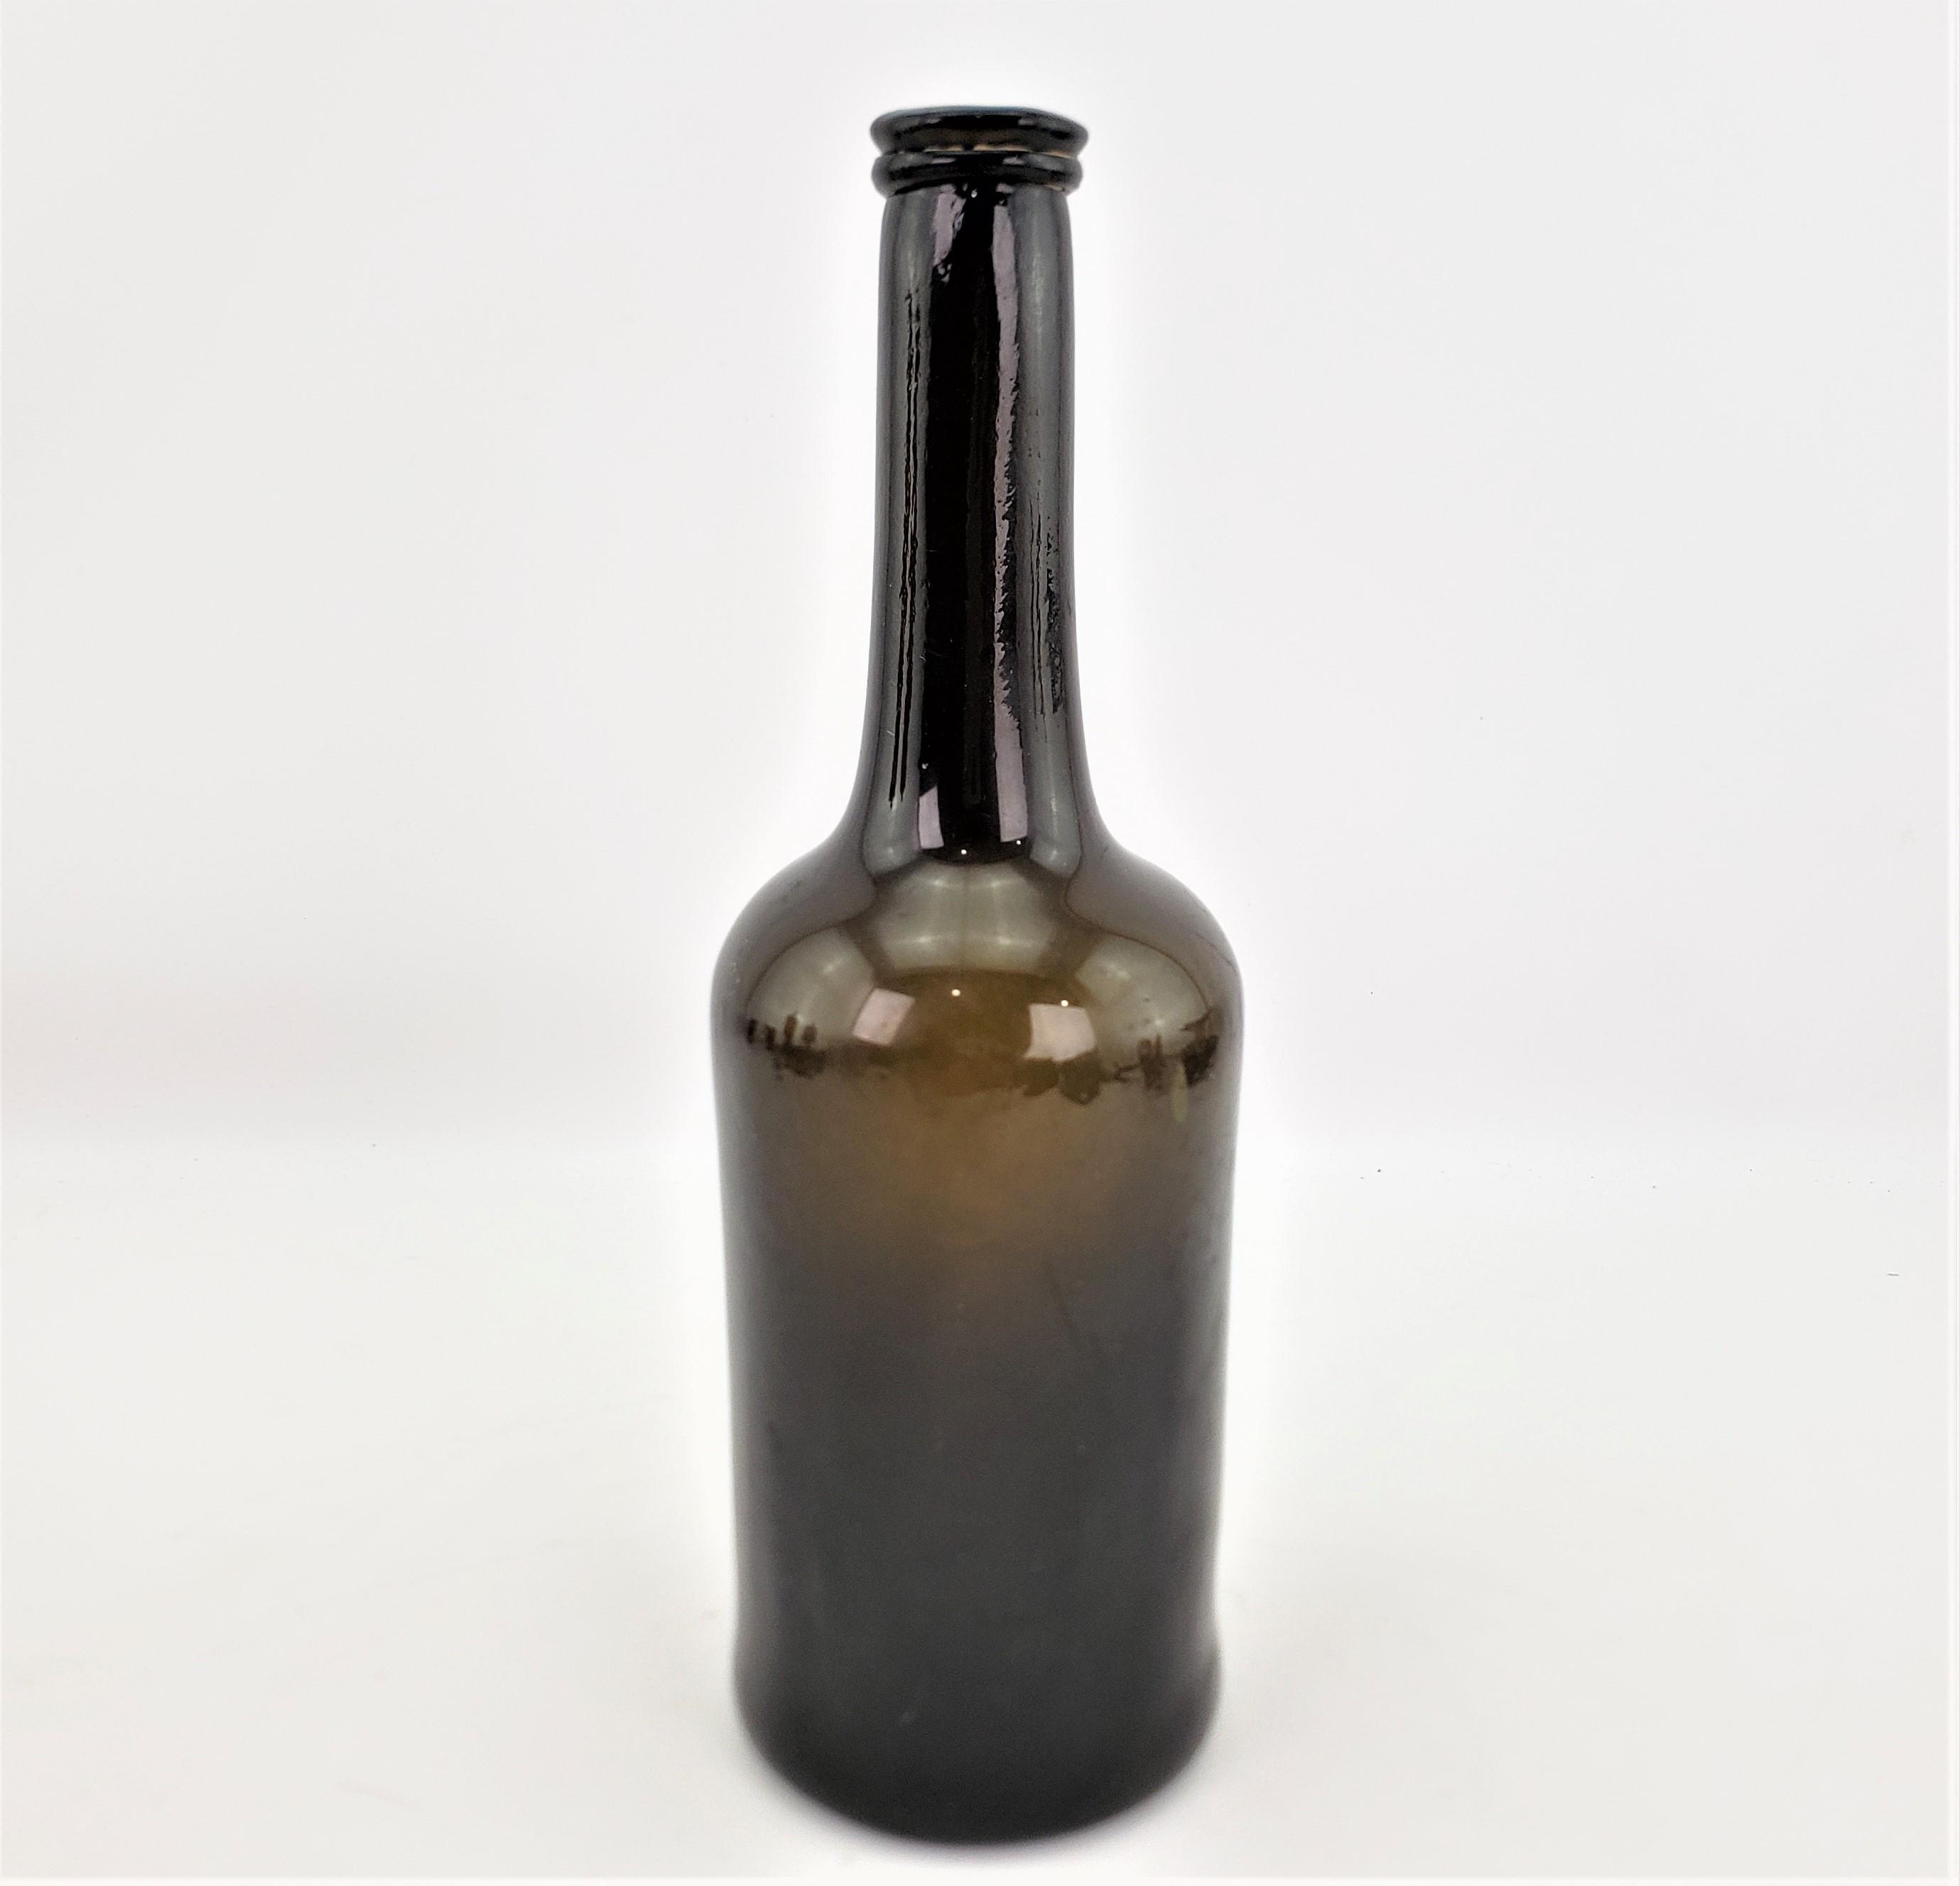 This antique hand-crafted wine bottle has no maker's marks, but presumed to have originated from England and date to approximately 1740 and done in a period Georgian style. The glass is a very deep olive green which was hand-blown and formed to a